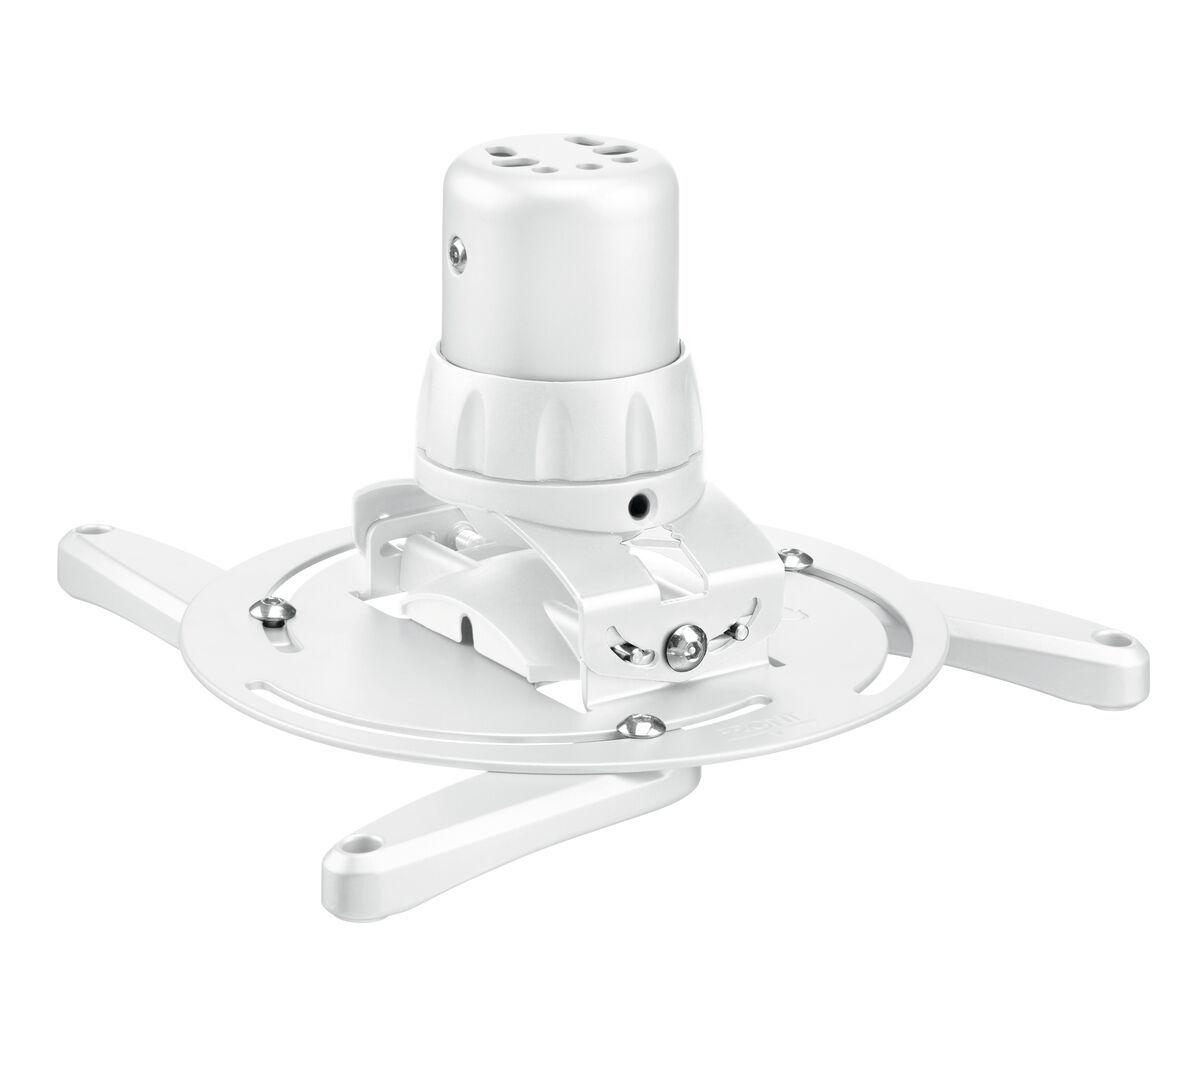 Vogel's PPC 1500 Projector Ceiling Mount (white) - Product